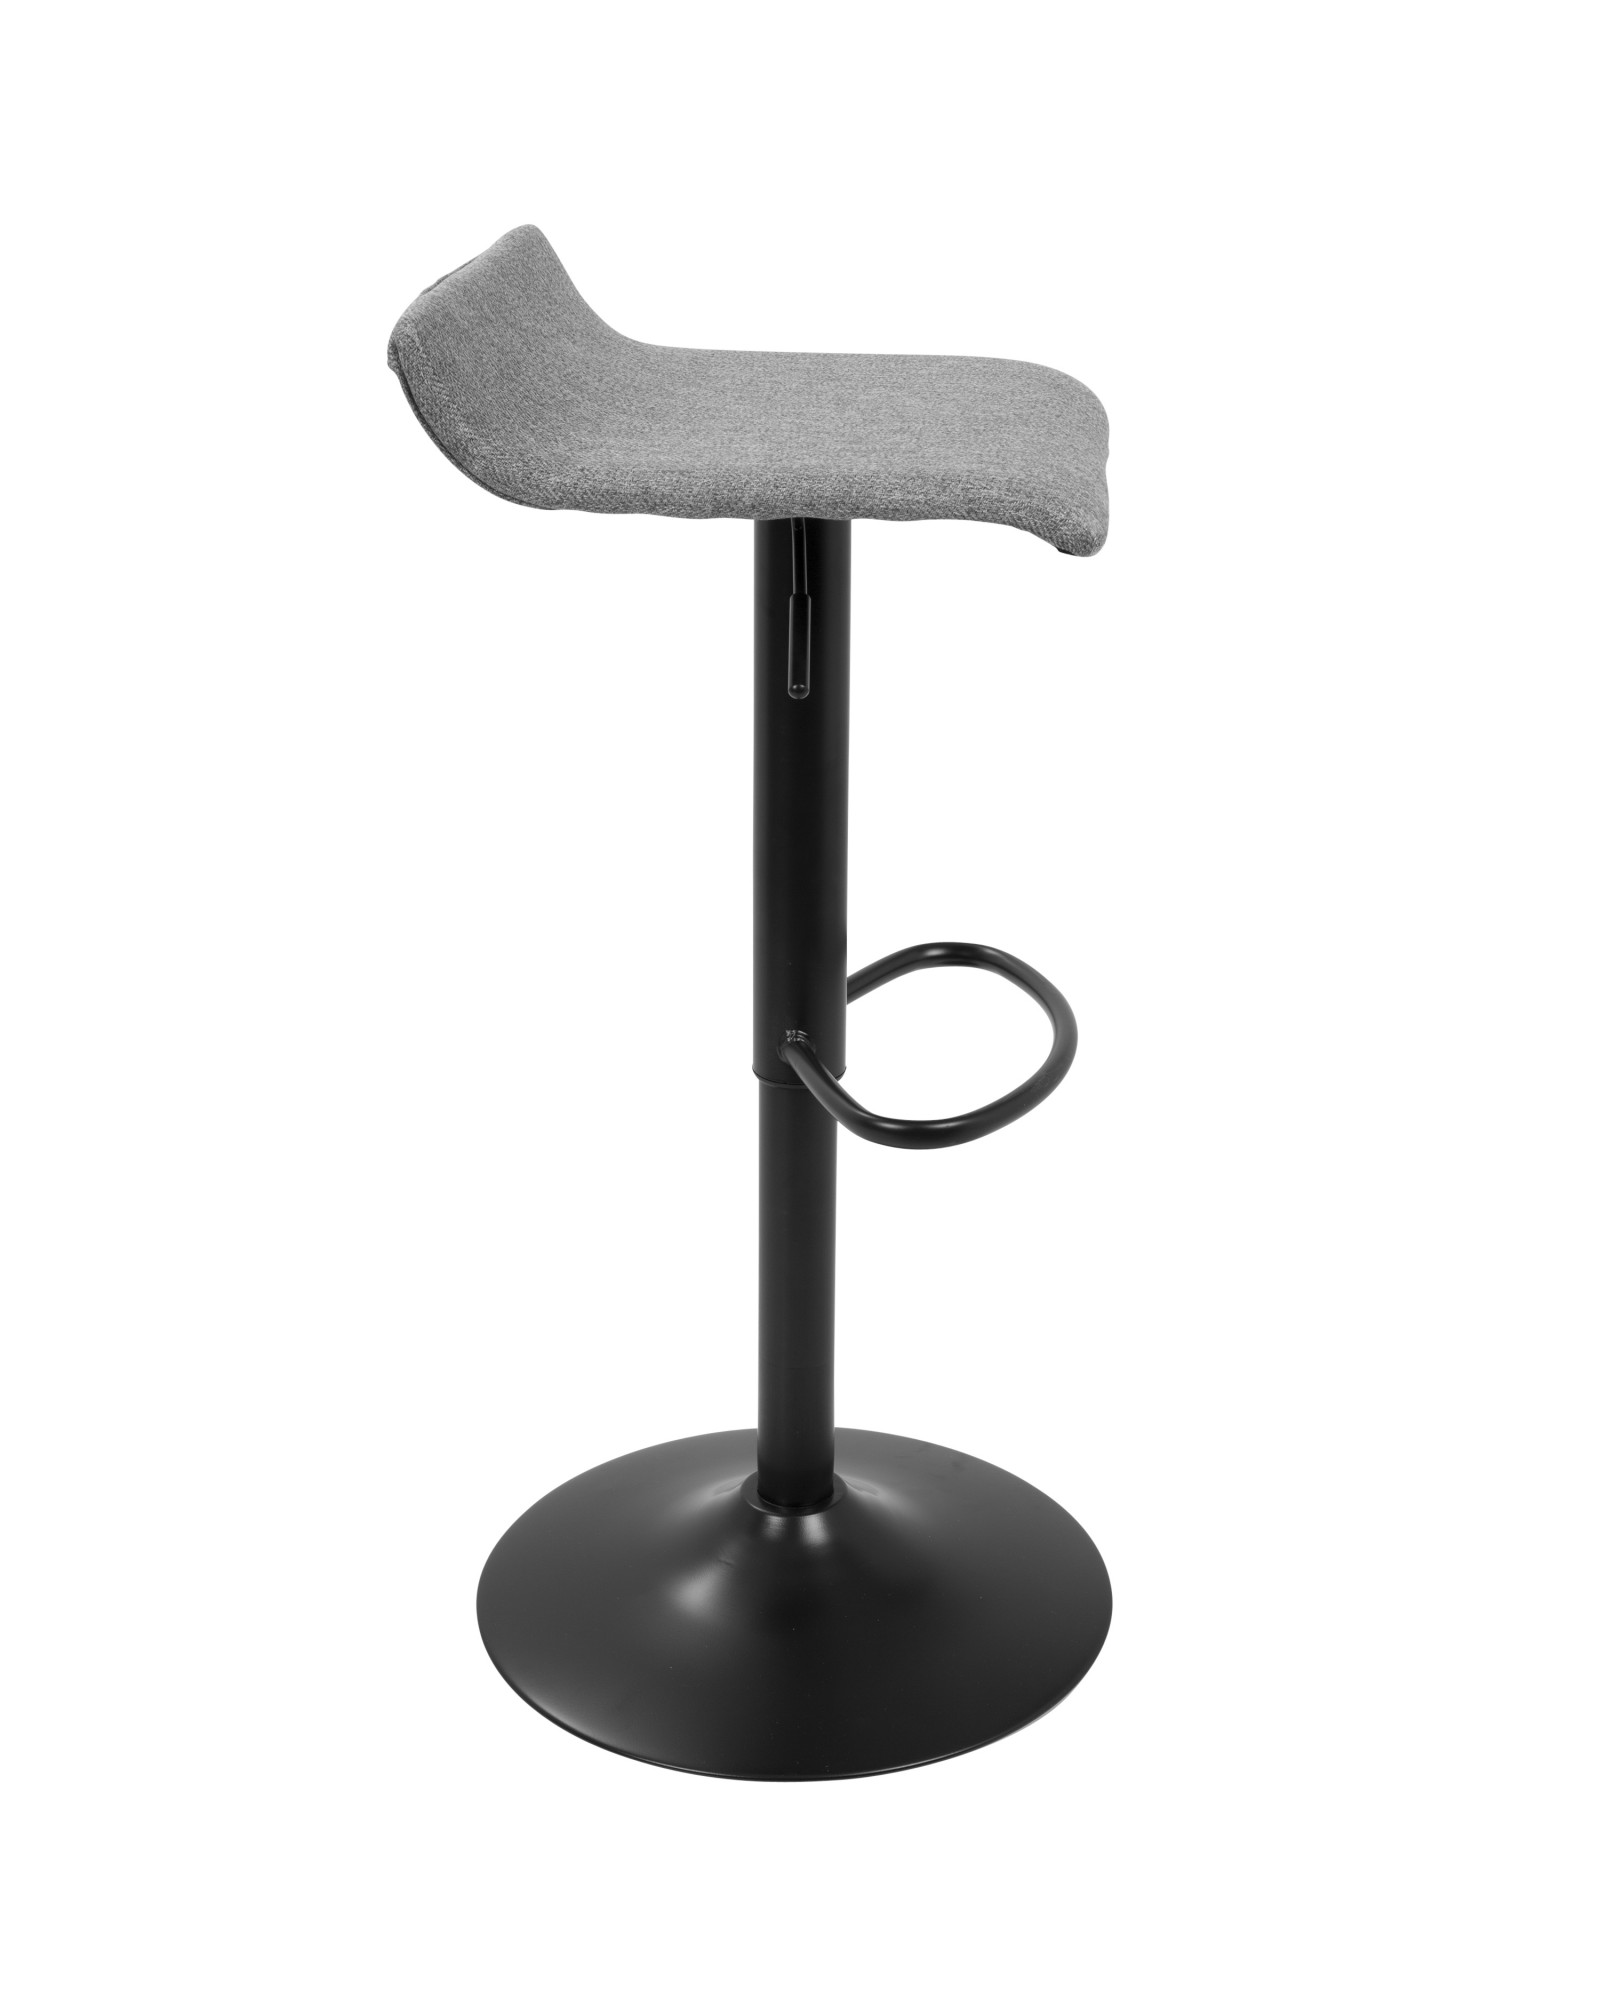 Ale XL Contemporary Adjustable Barstool in Black with Polyester Fabric - Set of 2